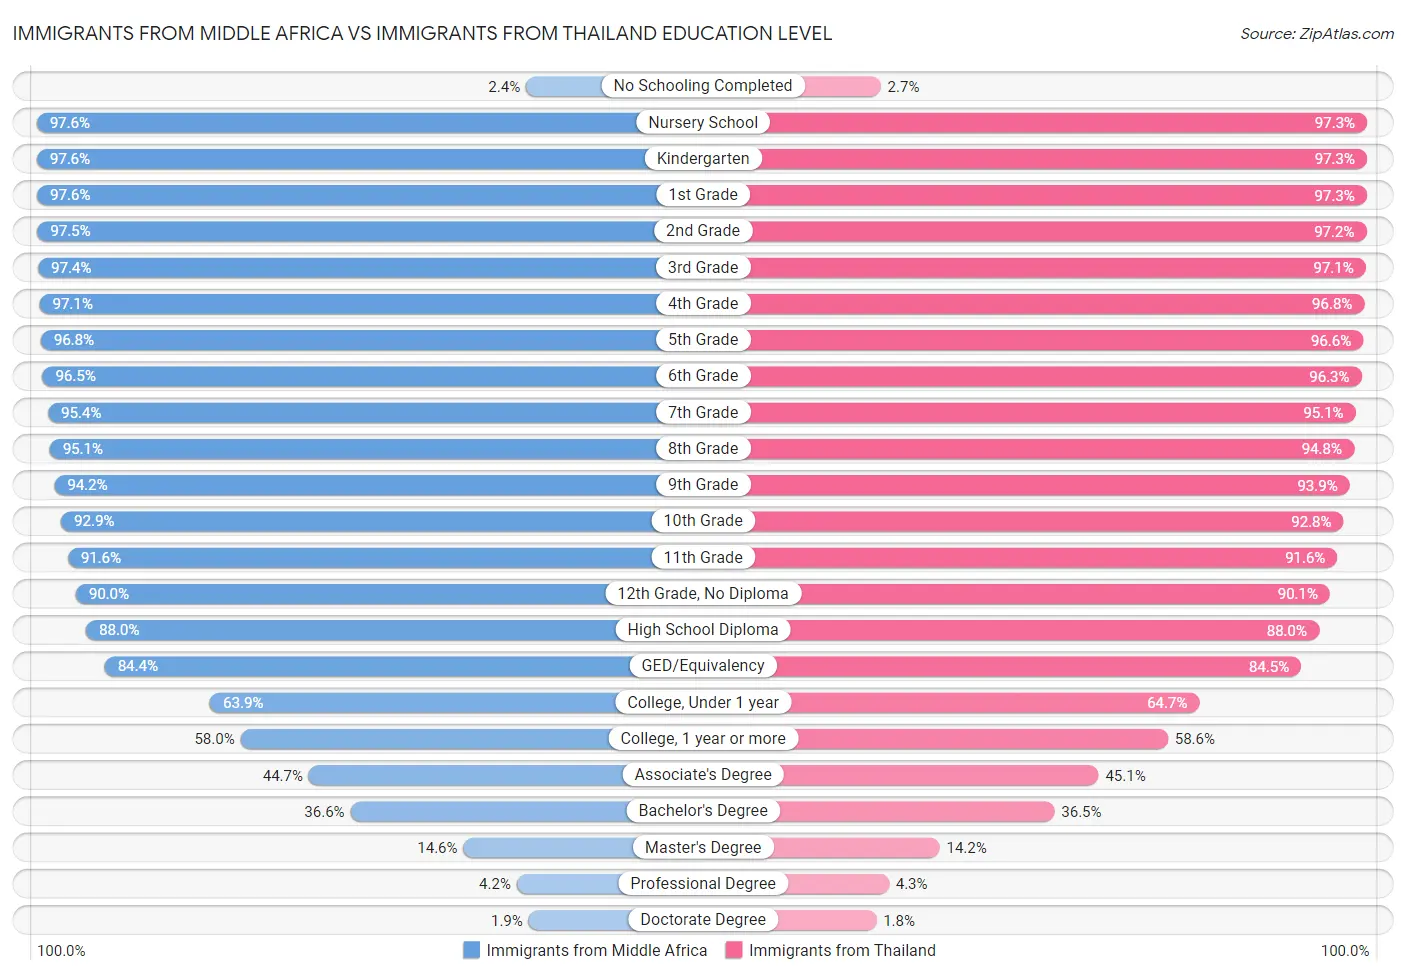 Immigrants from Middle Africa vs Immigrants from Thailand Education Level